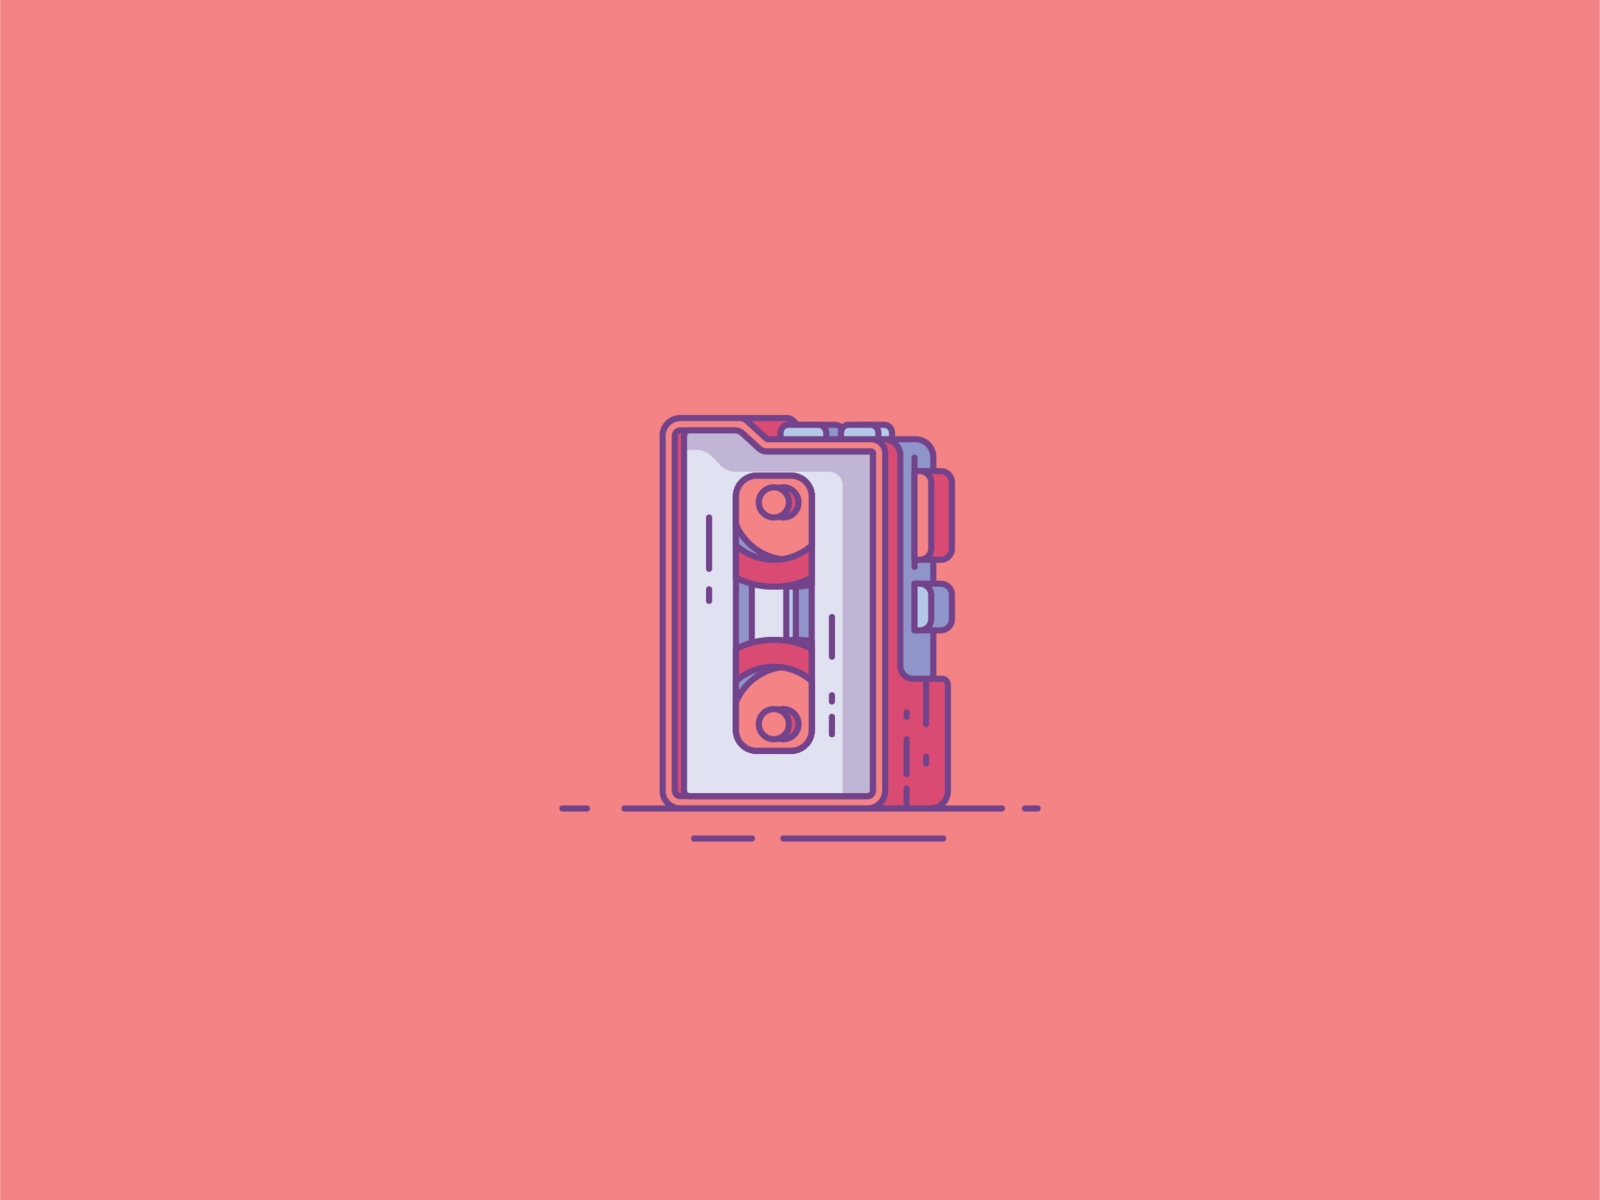 Audio recorder by DIGY on Dribbble